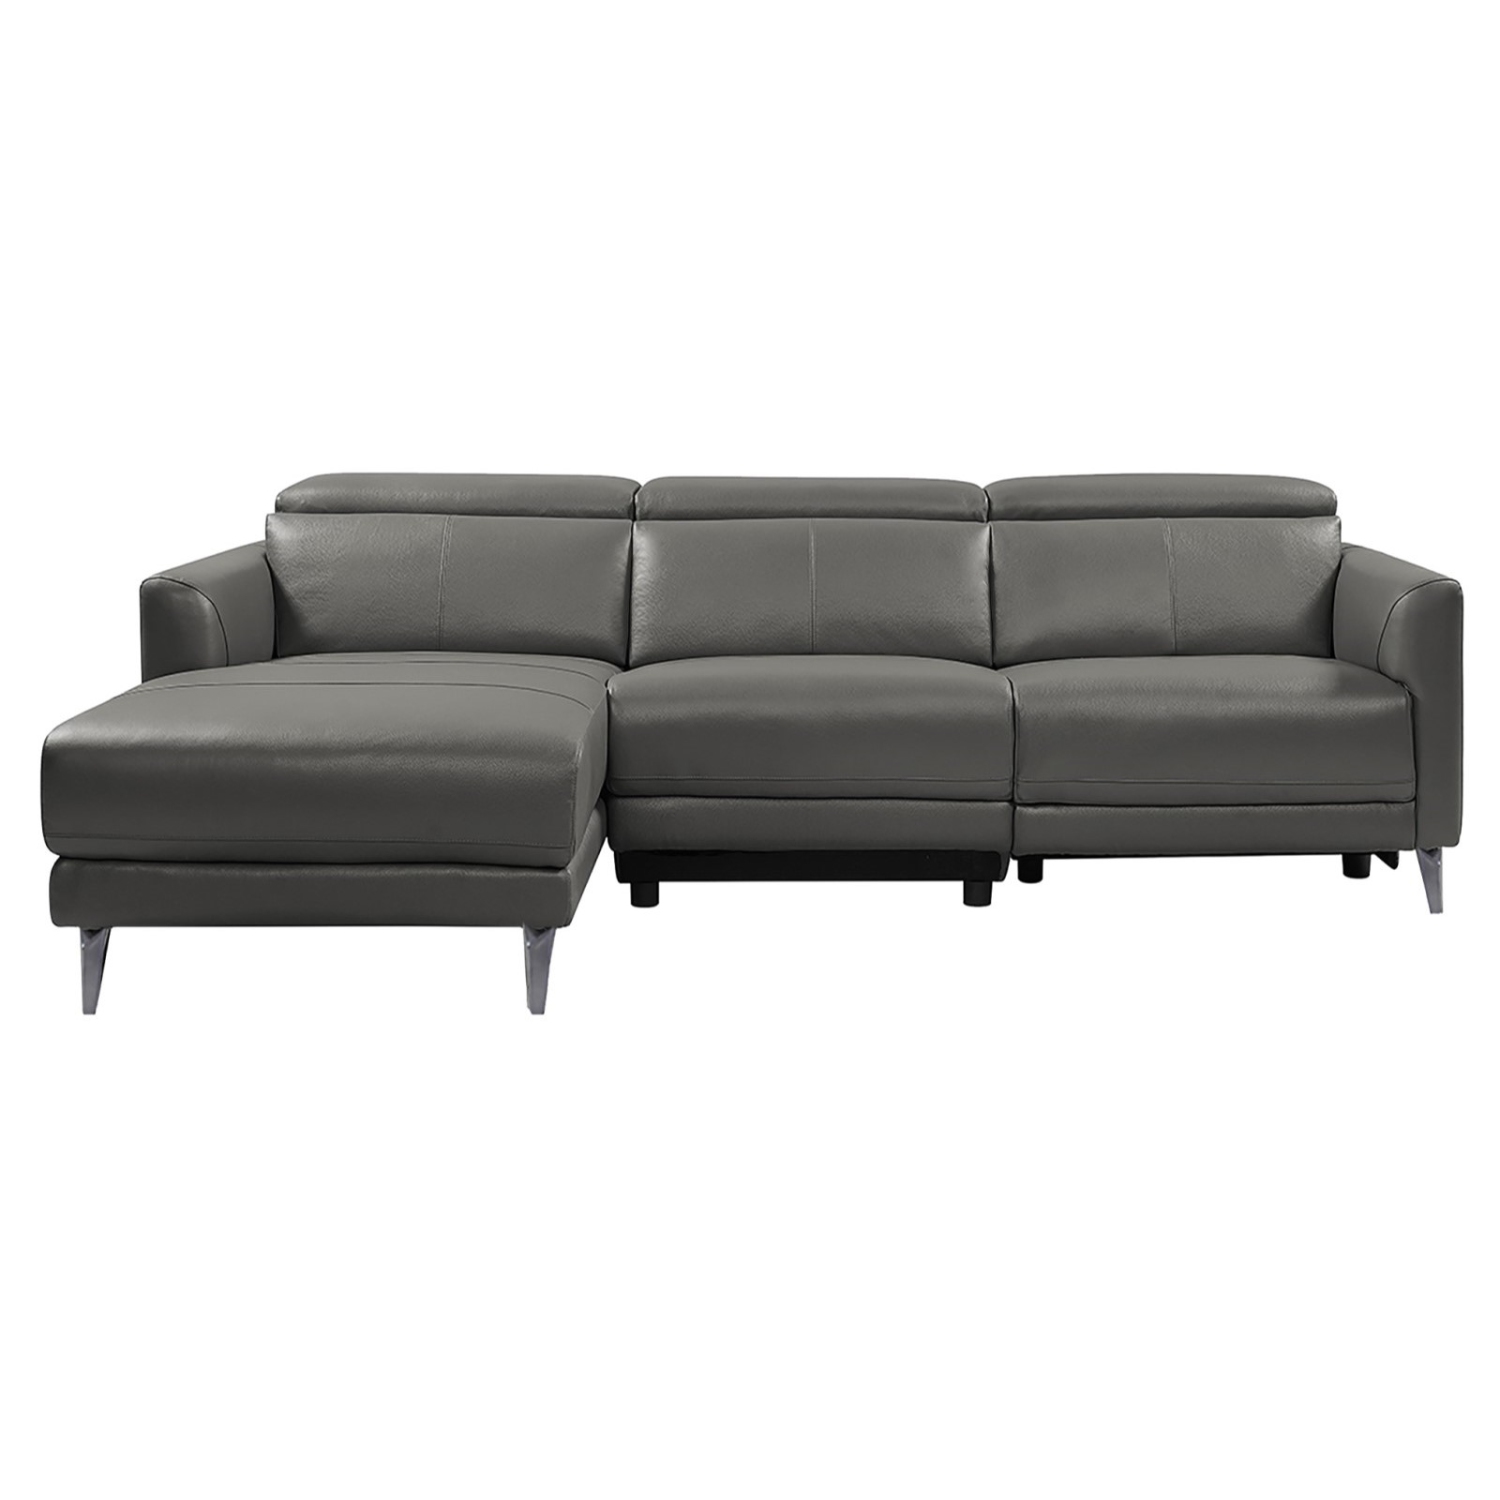 Valencia Andria Modern Left Hand Facing Chaise Top Grain Leather Reclining Sectional Sofa, Adjustable Headrest, Grey